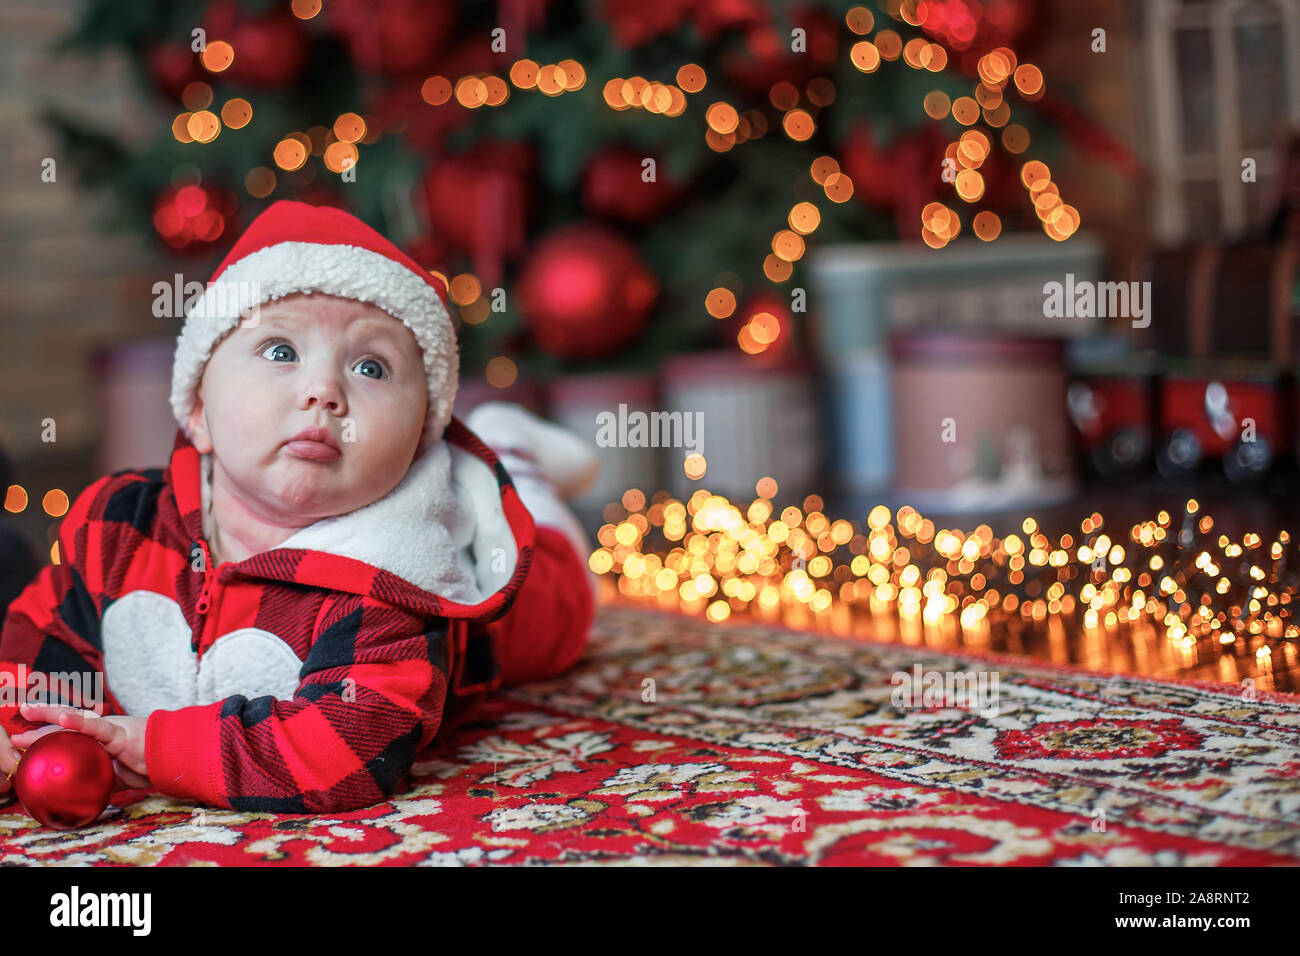 Little six month old baby dressed as Santa Claus. Background for christmas card. The child looks up at the place for inscription on background of lumi Stock Photo